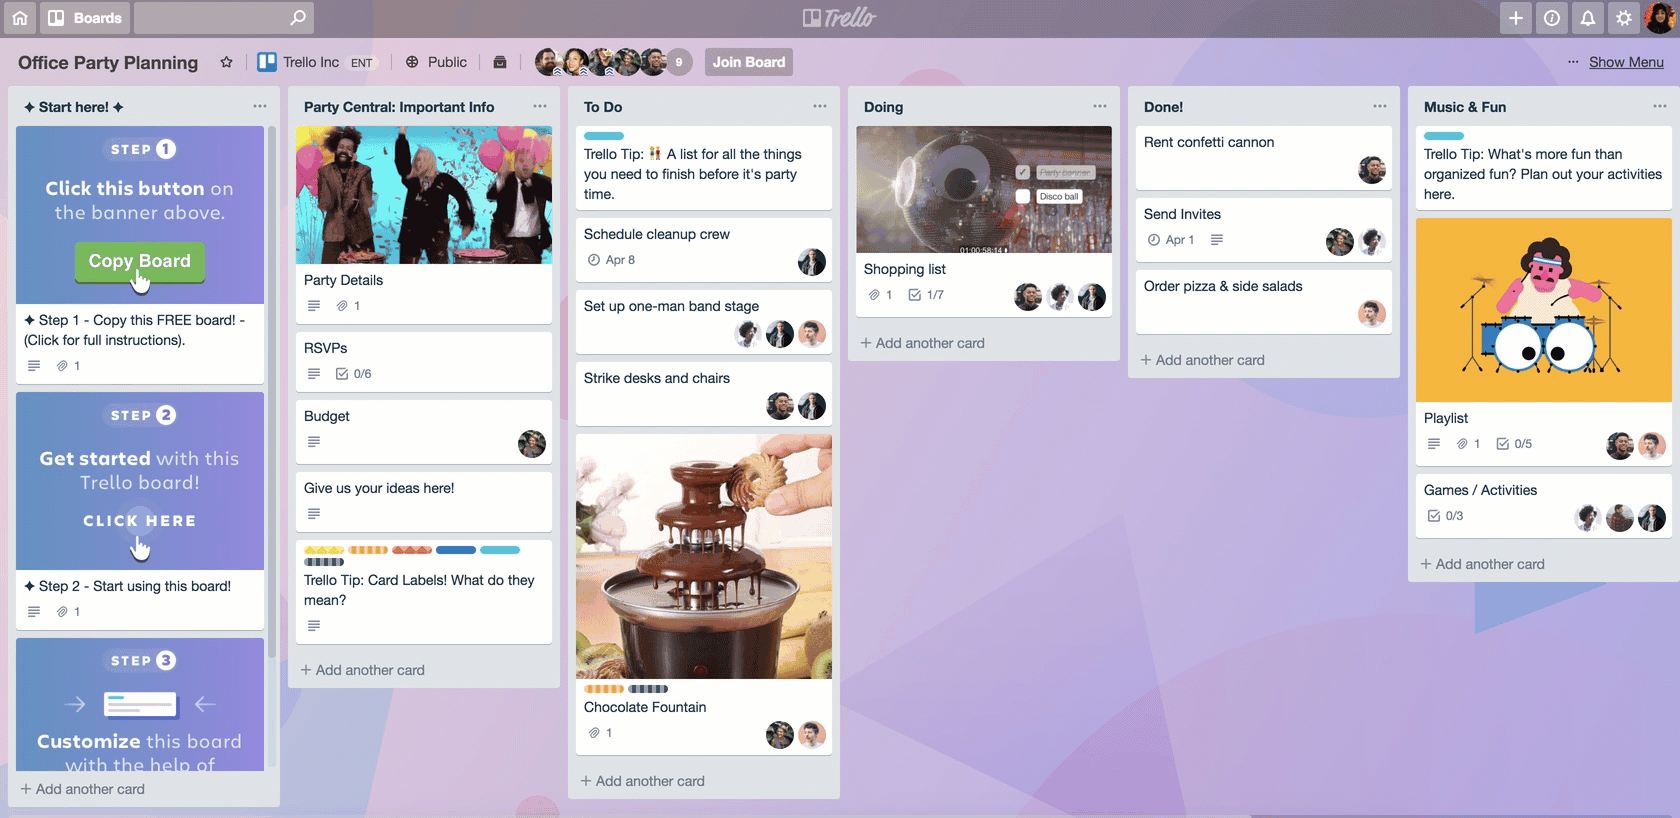 Trello Office Party Planning Board